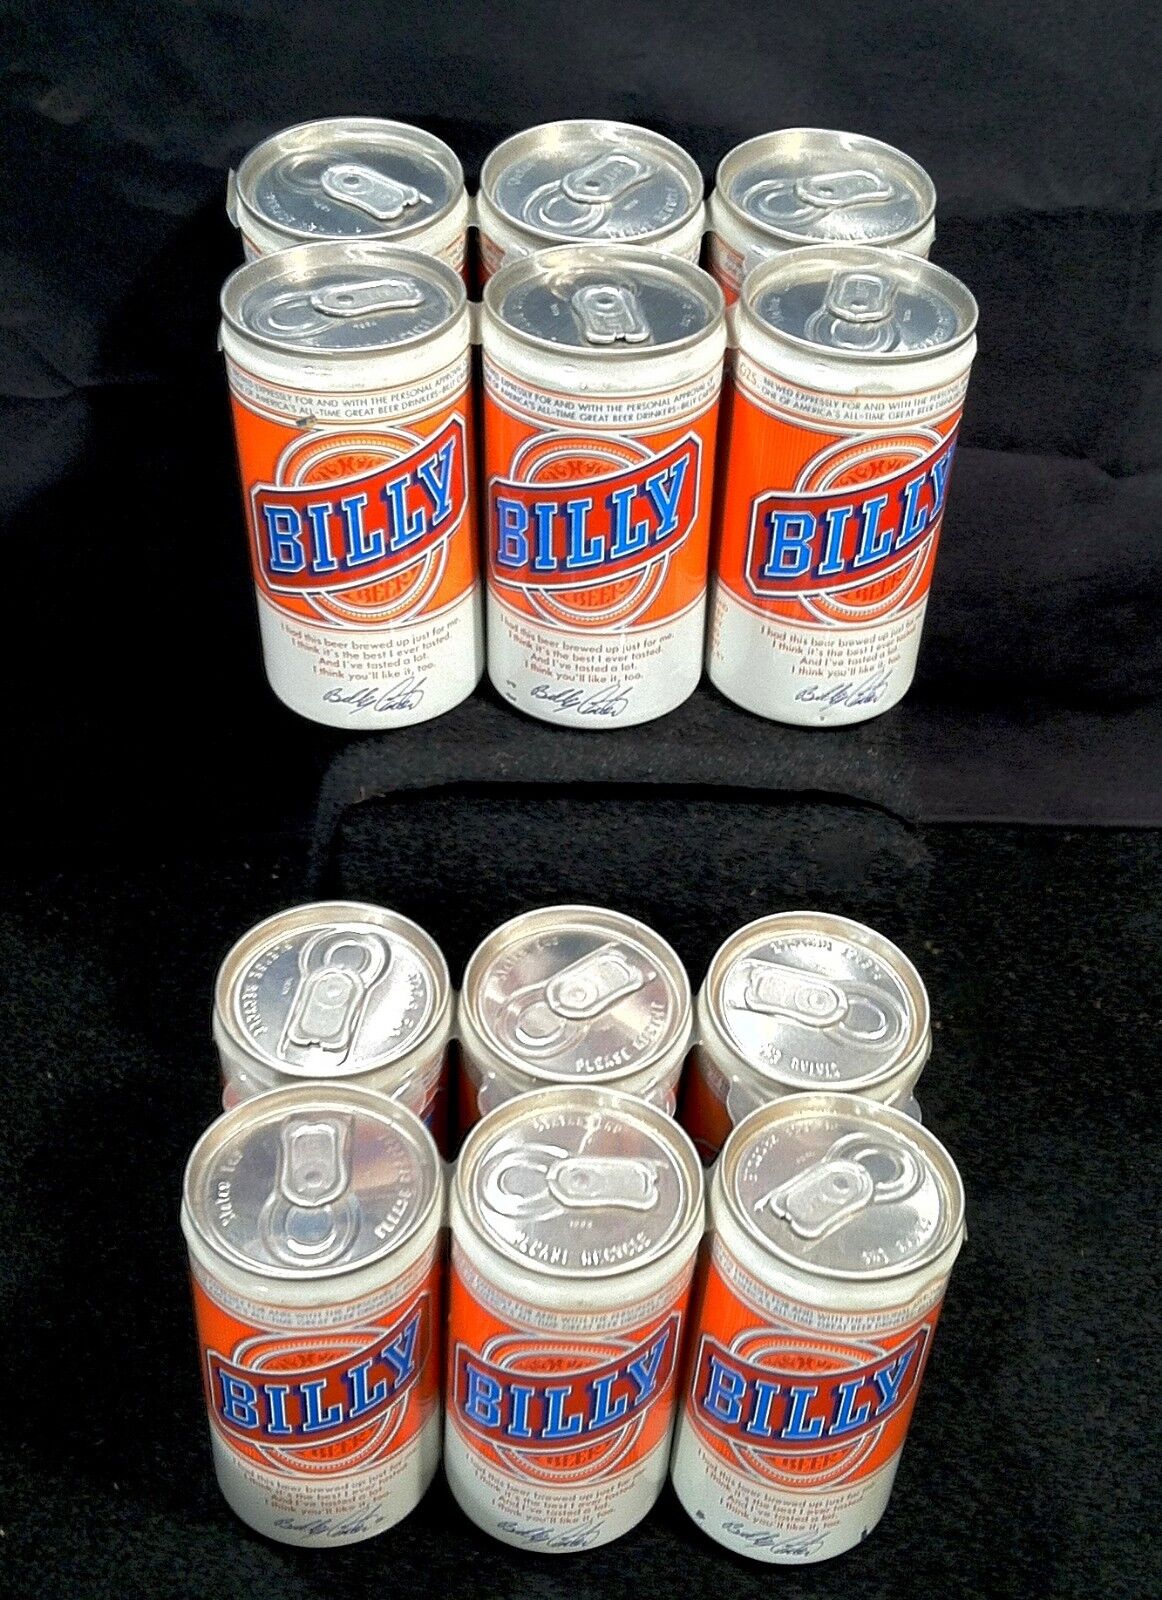 Six cans of Billy Beer- 5 Awesome Things on eBay this week